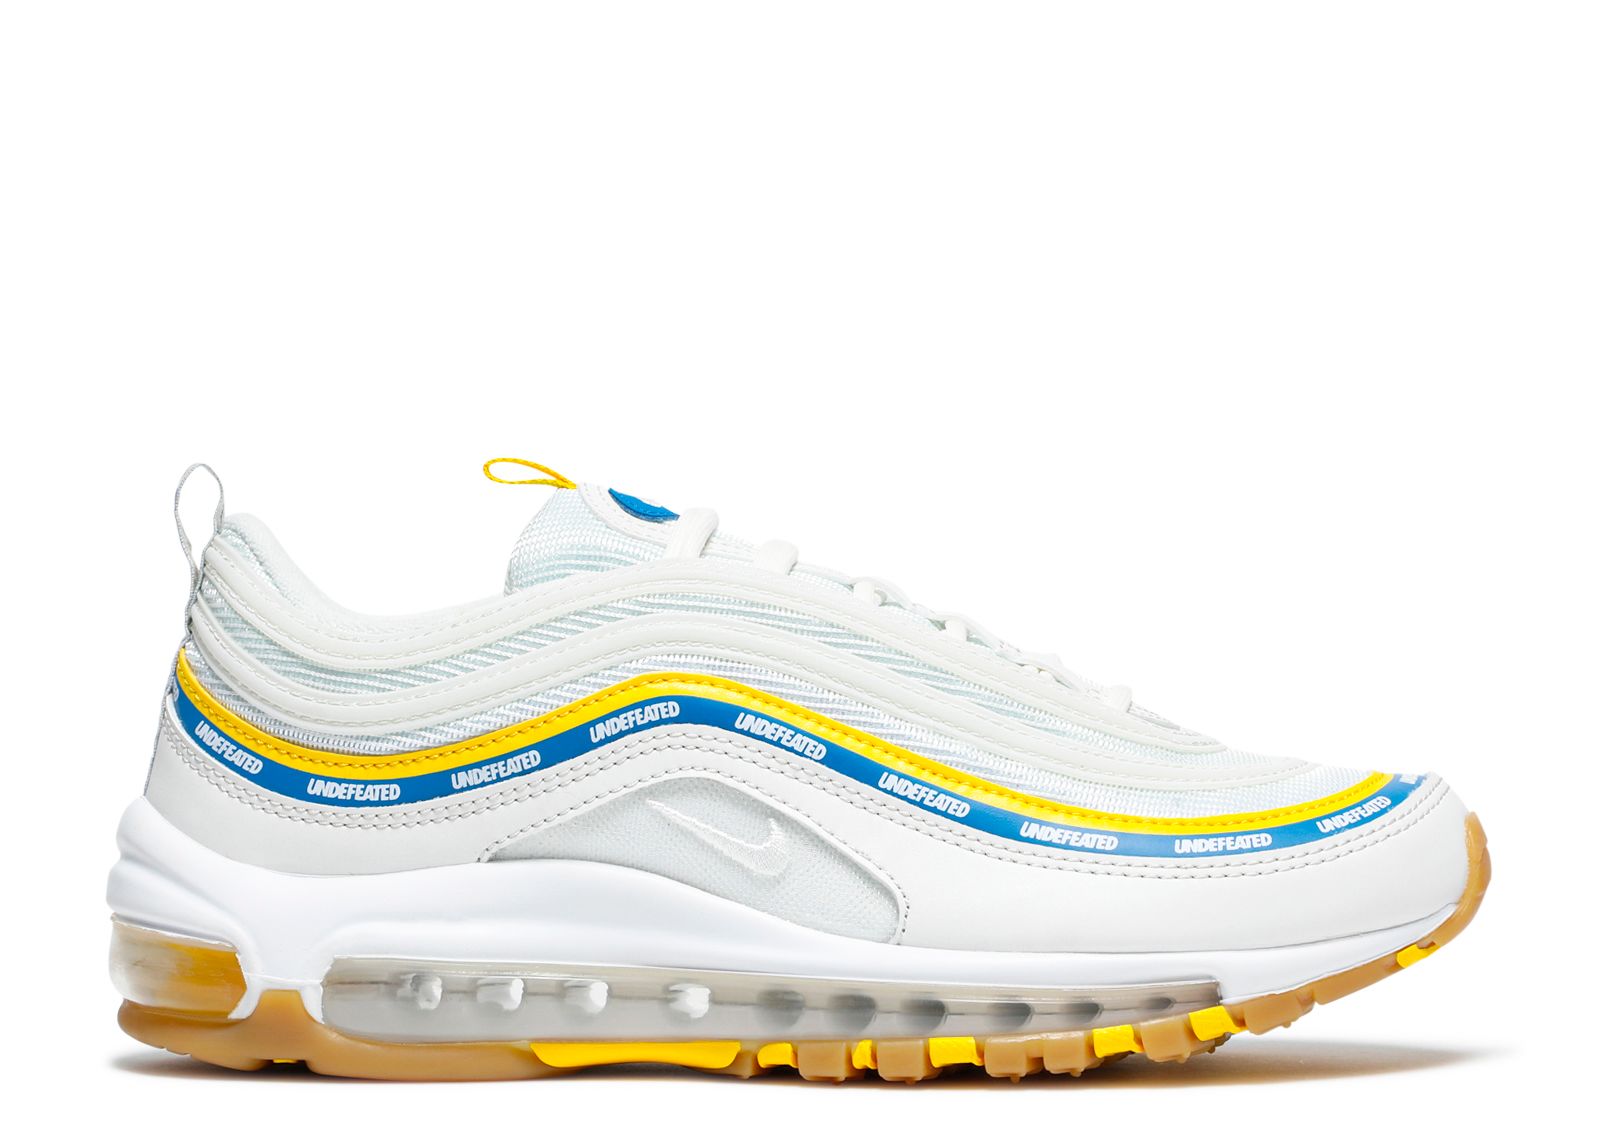 undefeated ucla air max 97